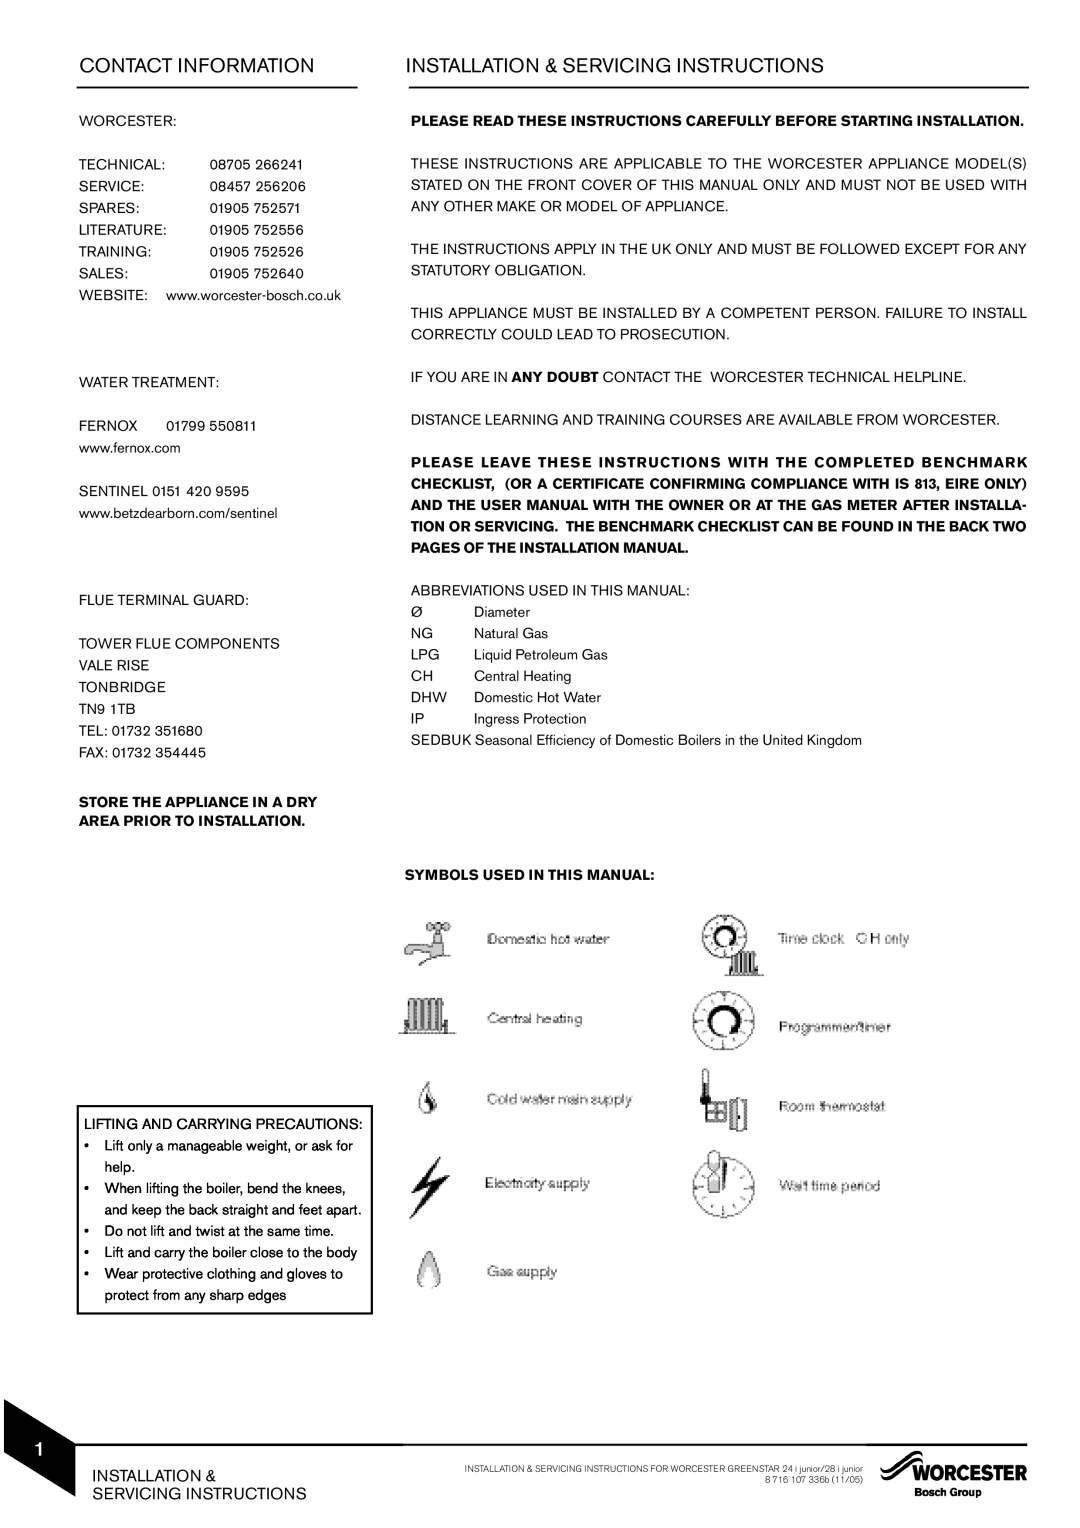 Bosch Appliances 28i junior manual Contact Information, Installation & Servicing Instructions, Symbols Used In This Manual 